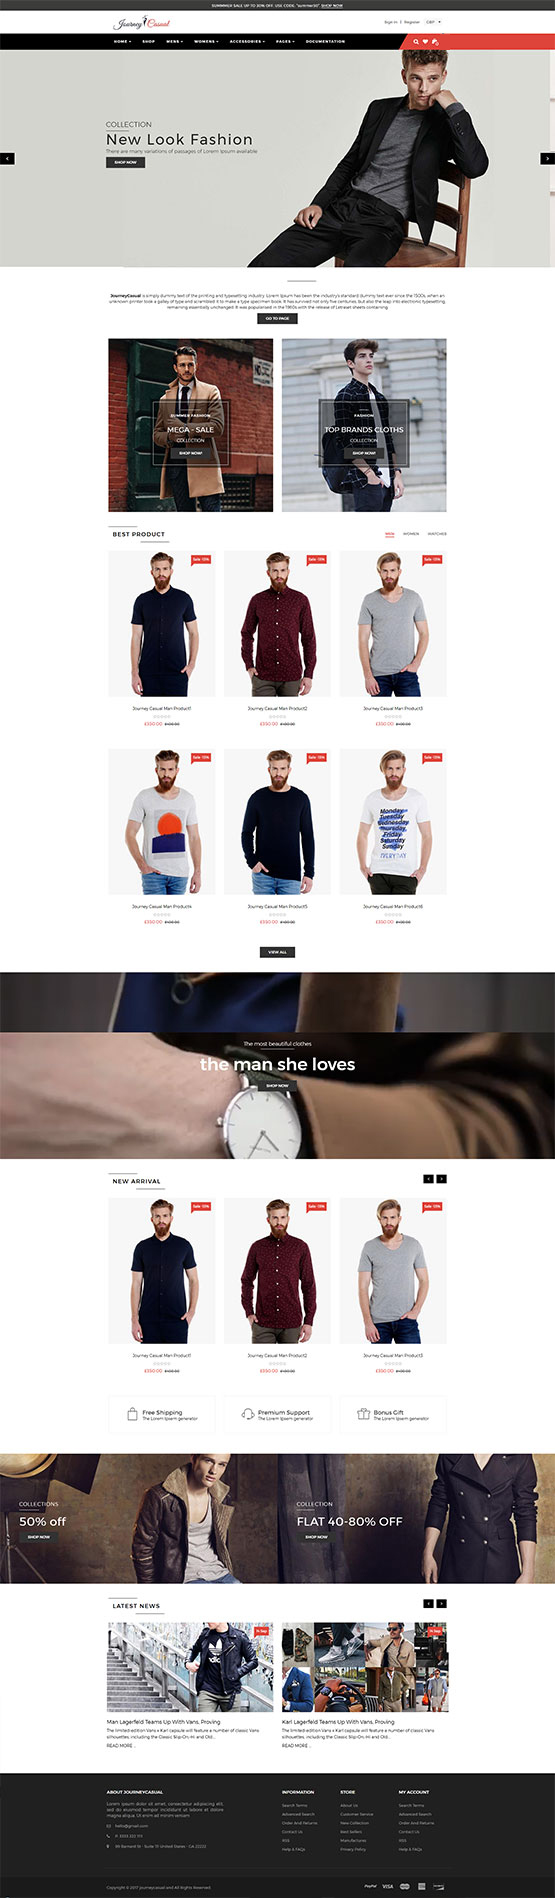 Best Shopify themes for men wear - Journey Casual - Multipurpose Fashion Shopify Theme